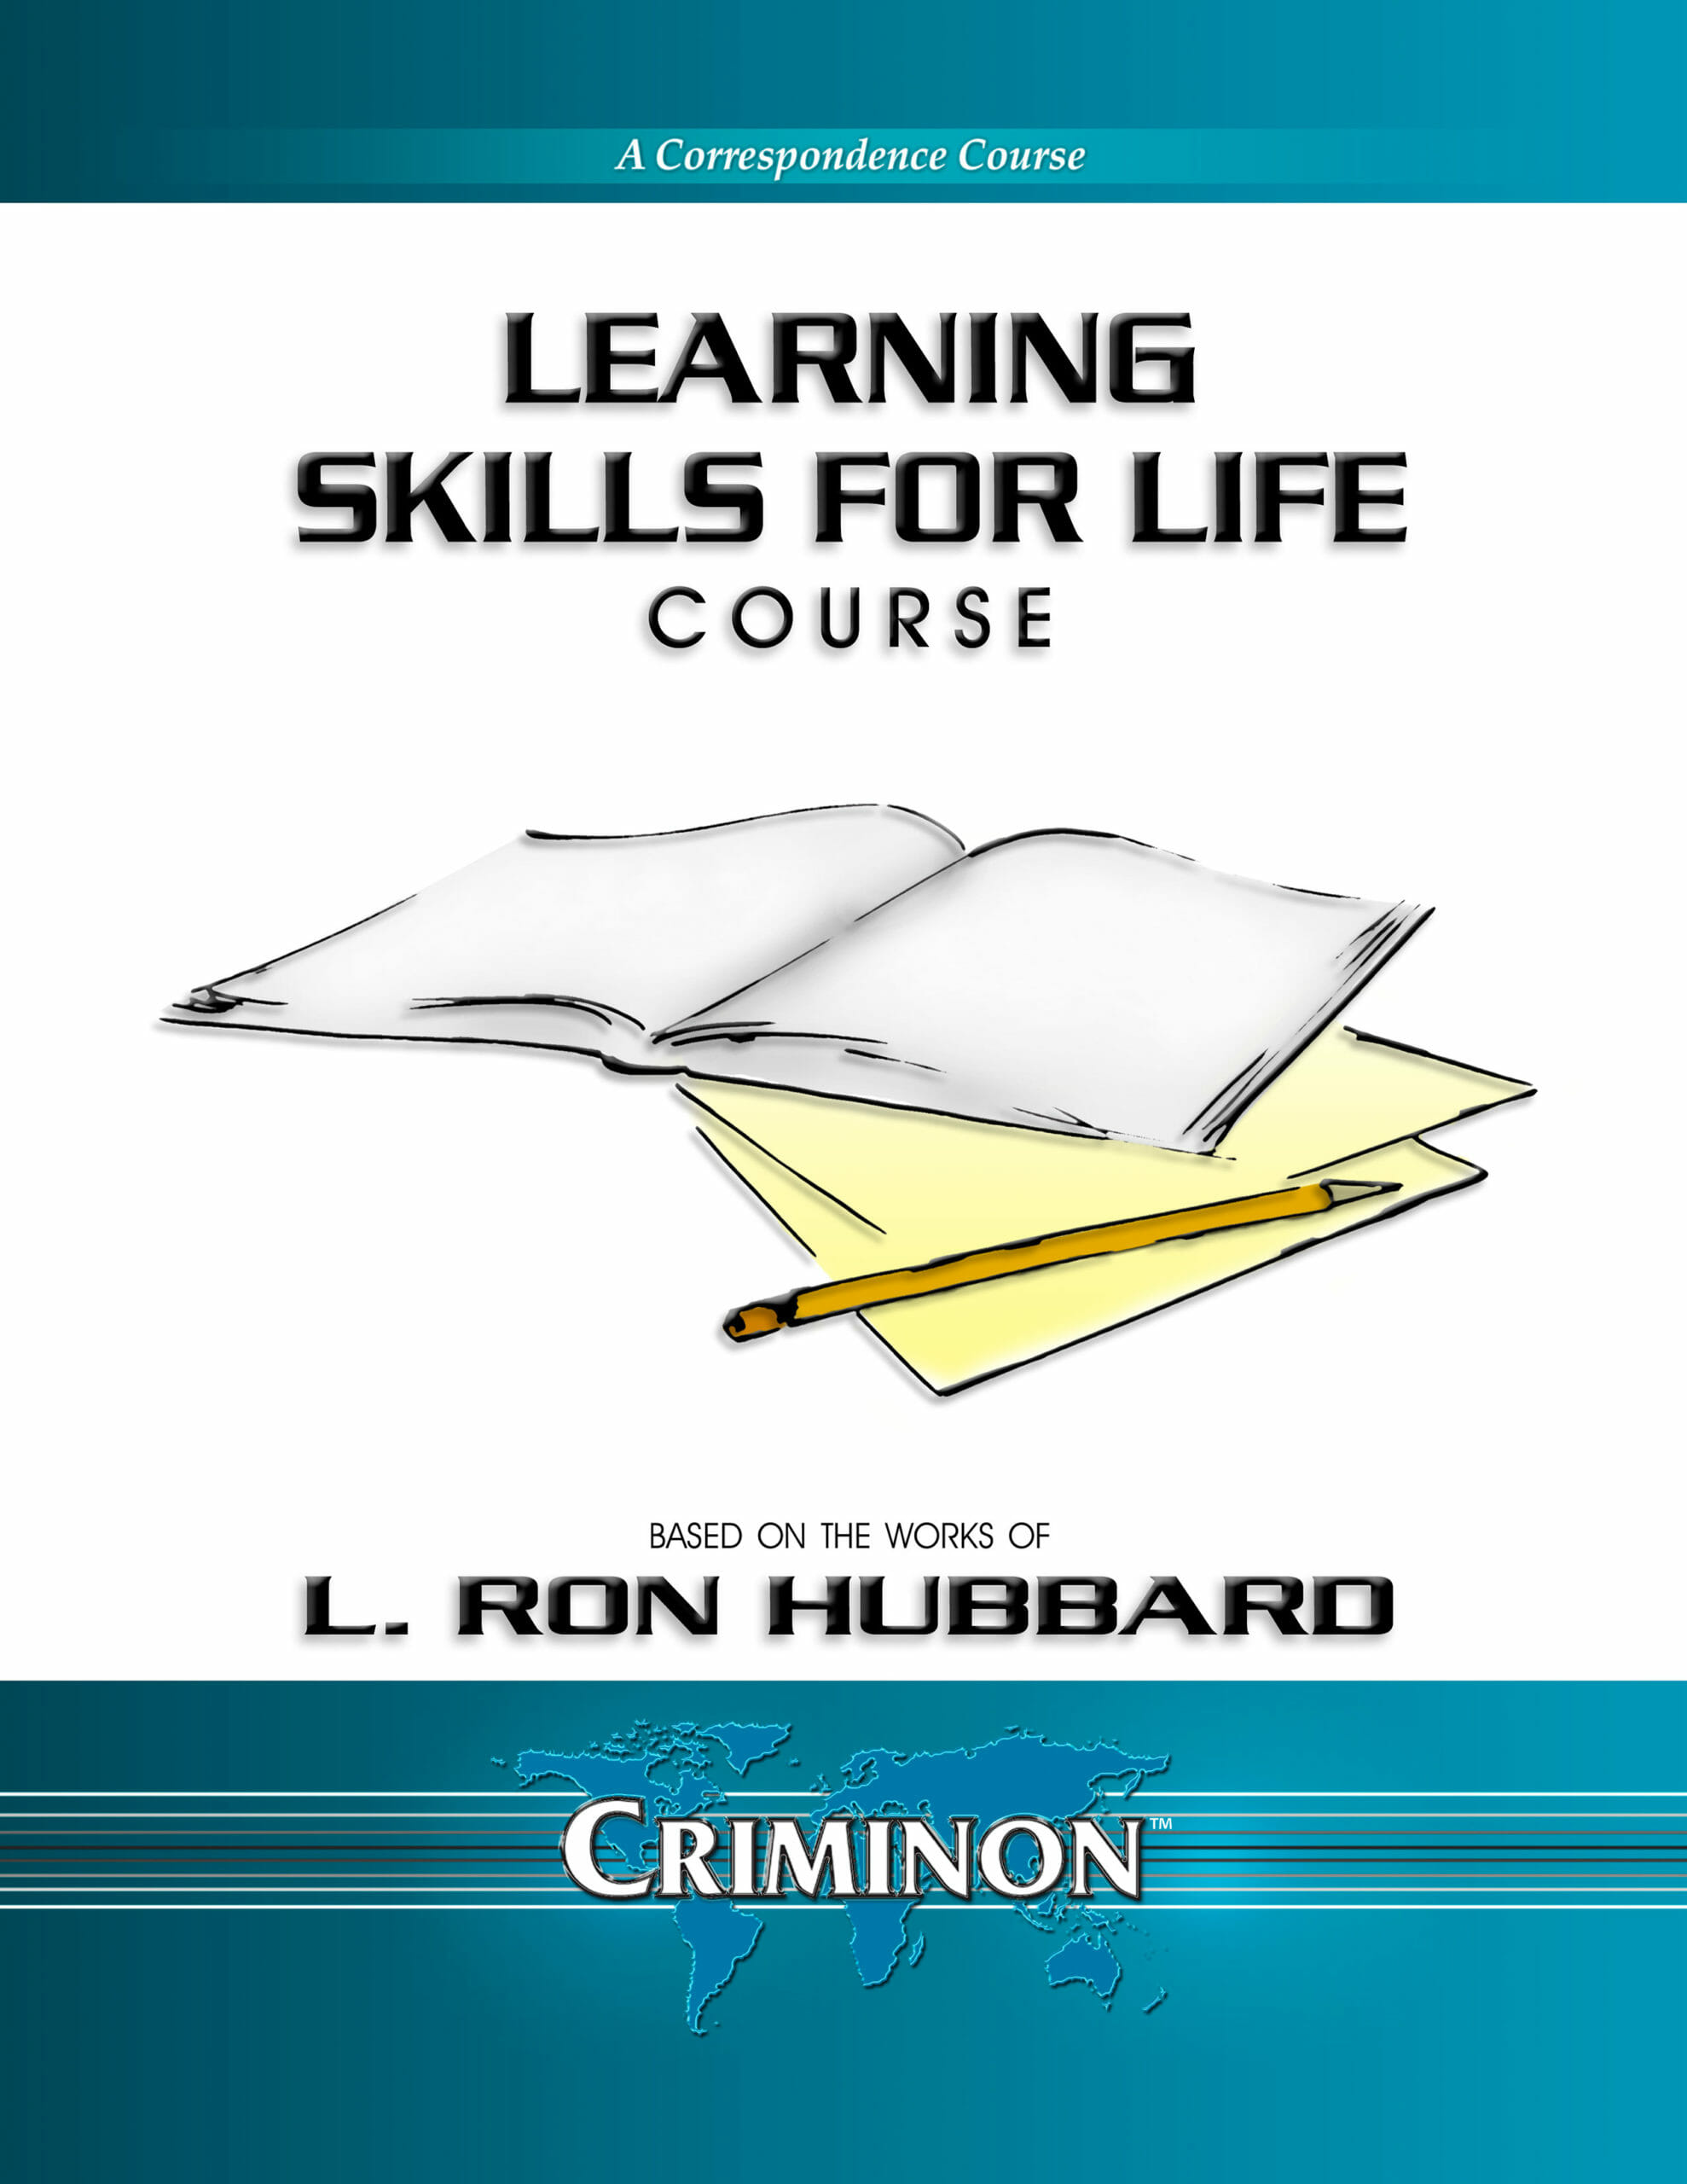 Learning Skills for Life Course - Criminon